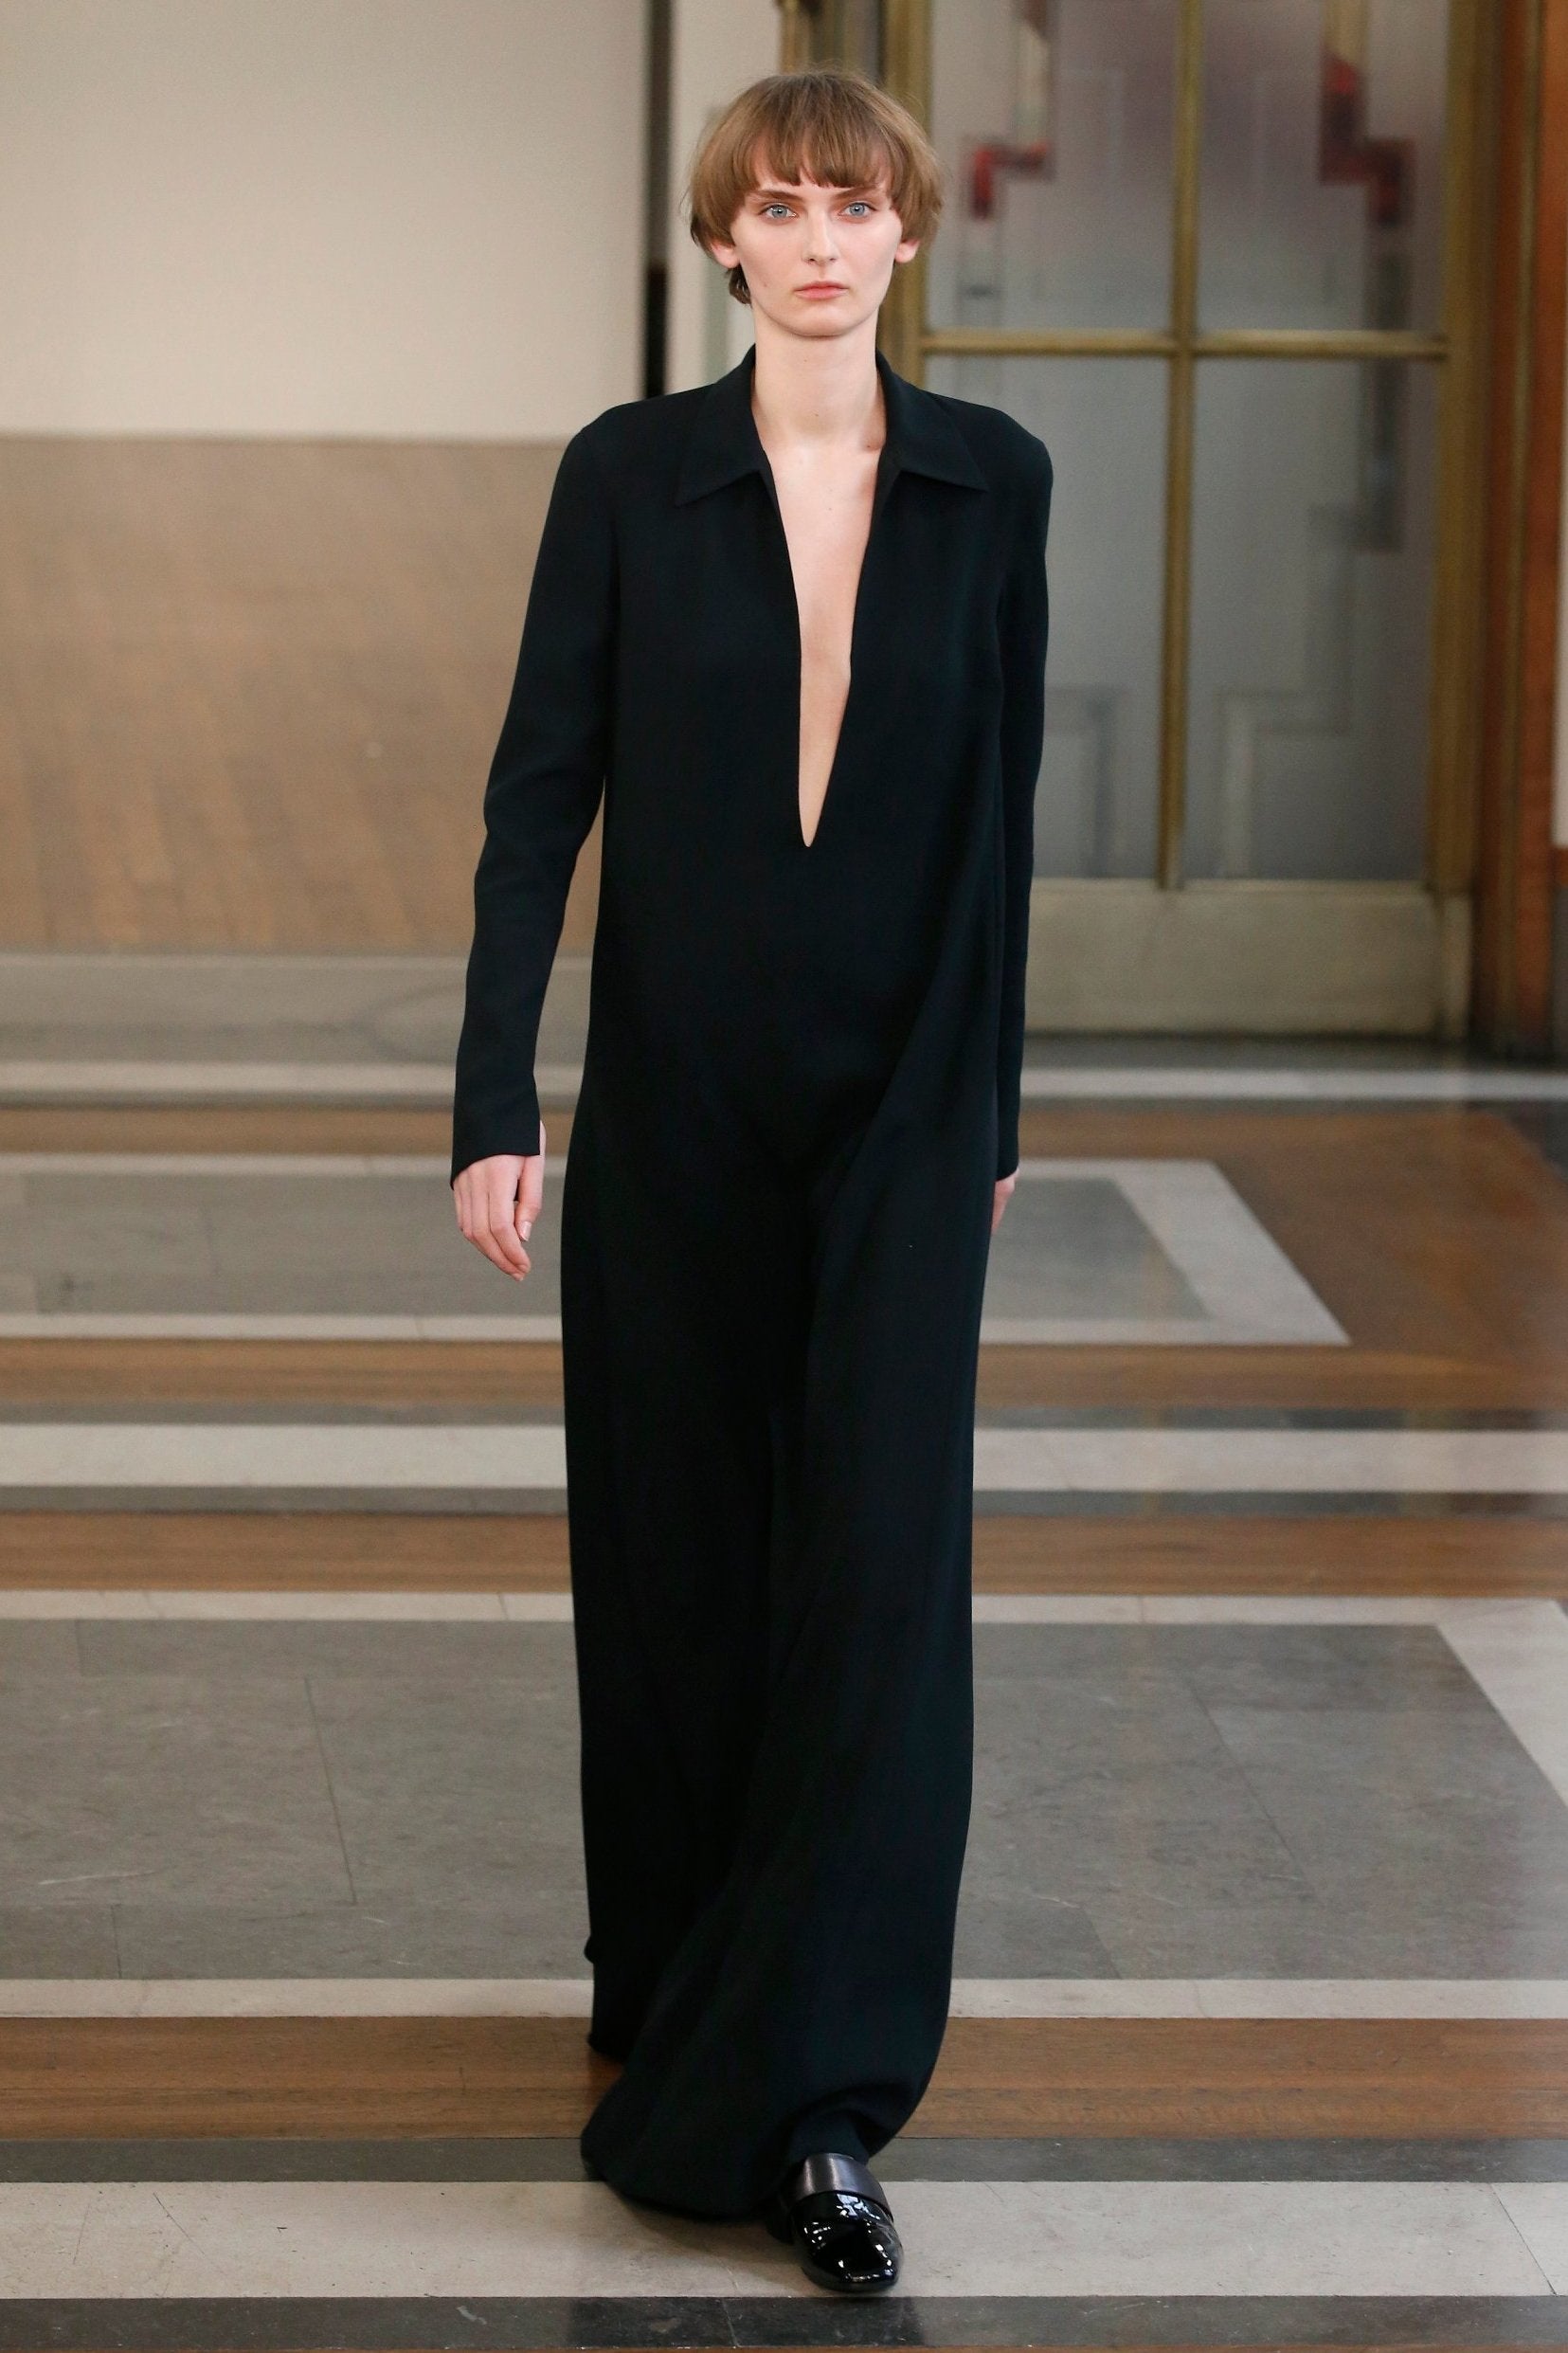 Full-length black dresses were a prominent feature in Jasper Conran’s collection